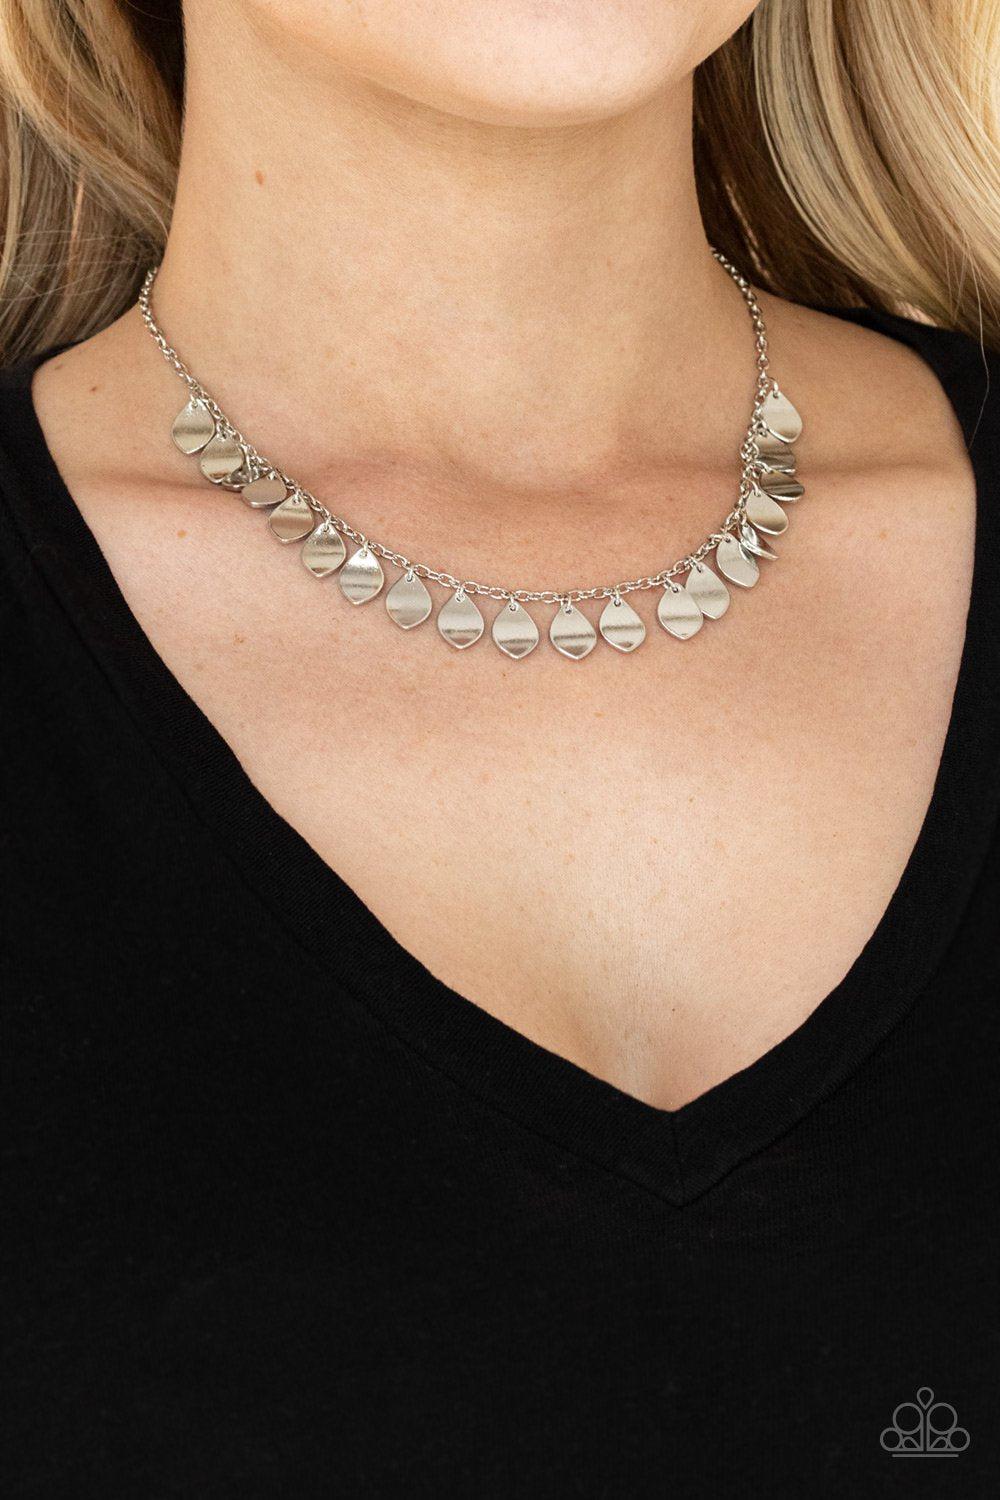 Dainty DISCovery Silver Necklace - Paparazzi Accessories- model - CarasShop.com - $5 Jewelry by Cara Jewels